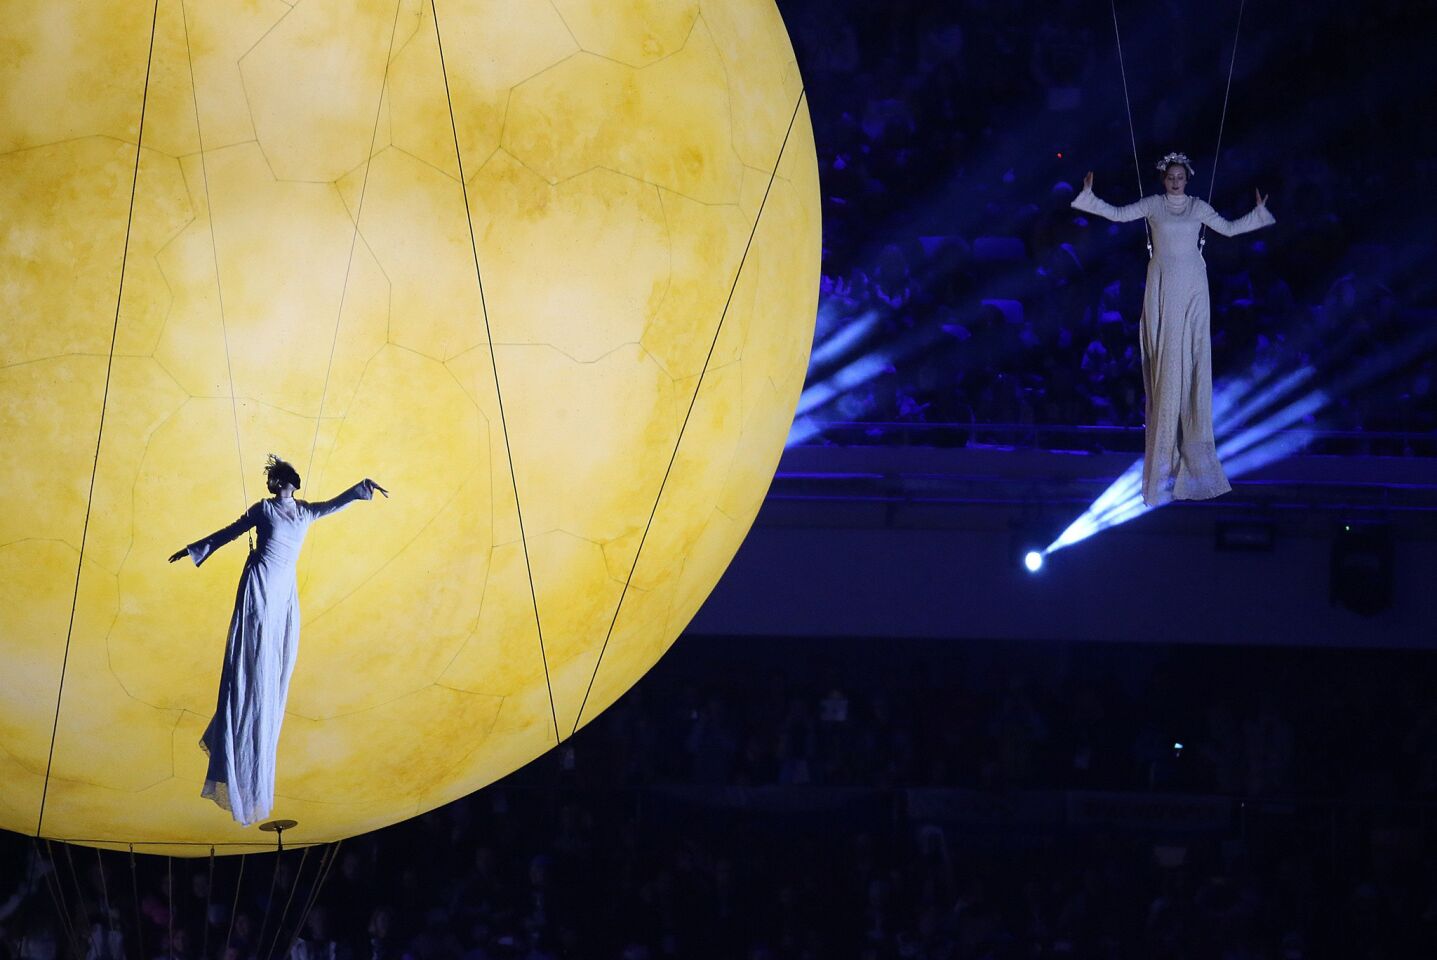 Actors perform with a large orb during the 2014 Winter Olympics Closing Ceremony.